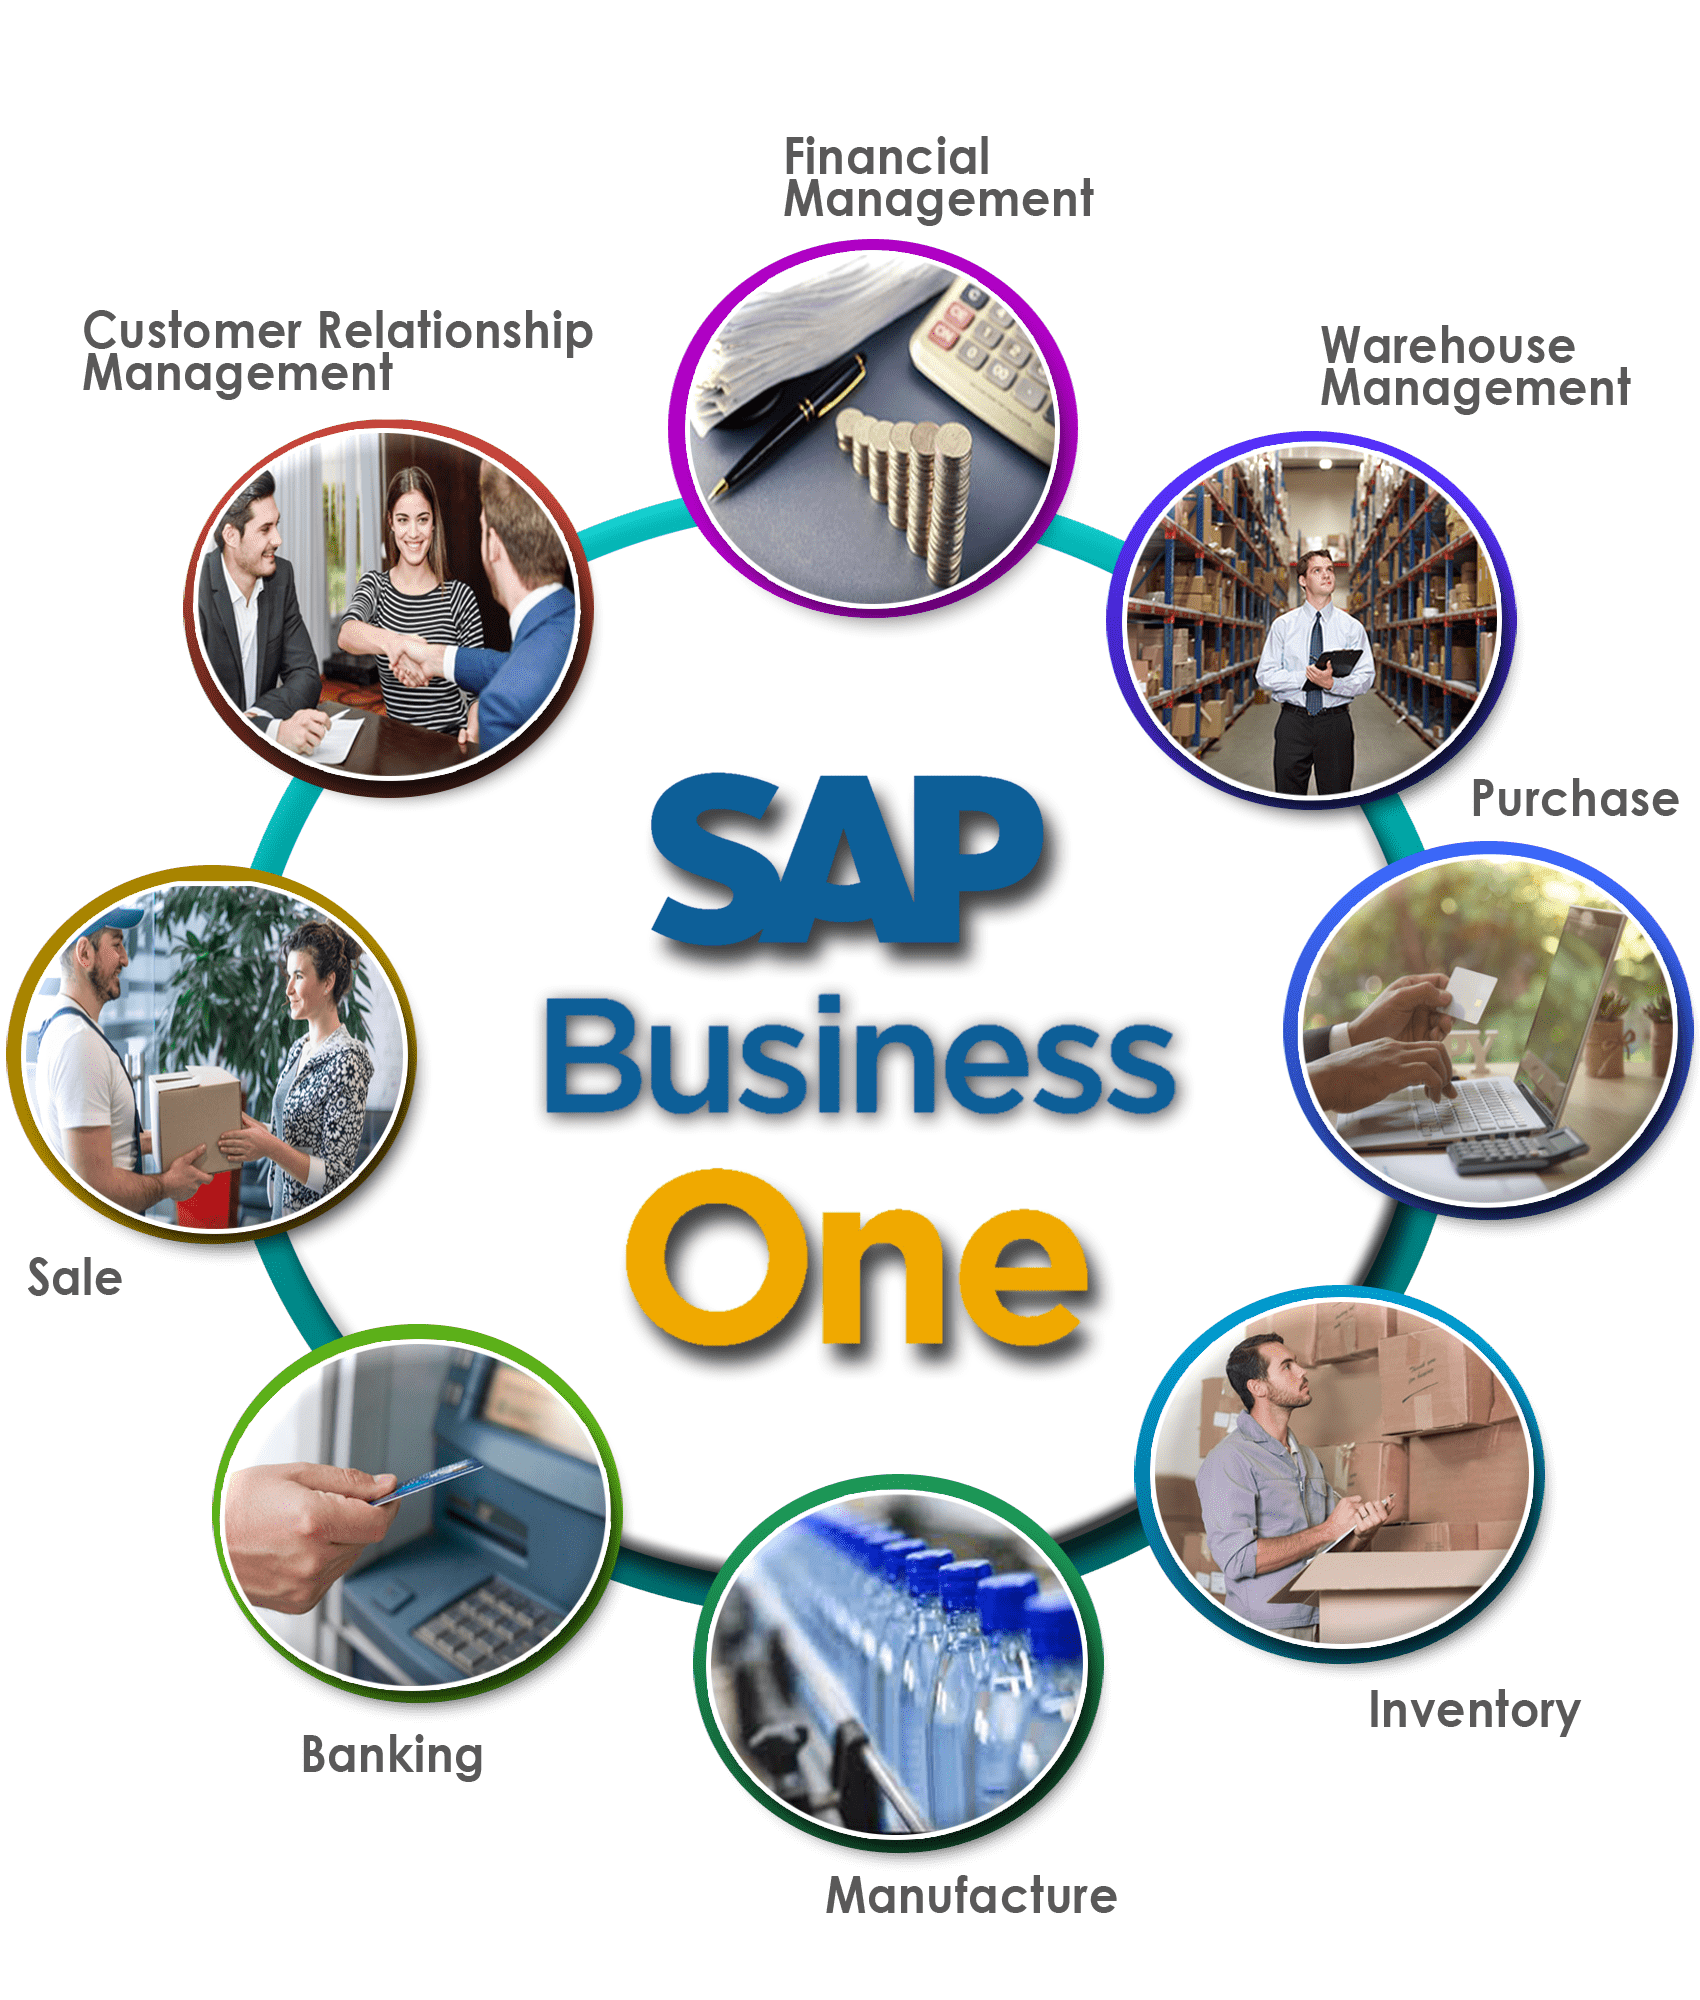 SAP Business One Services